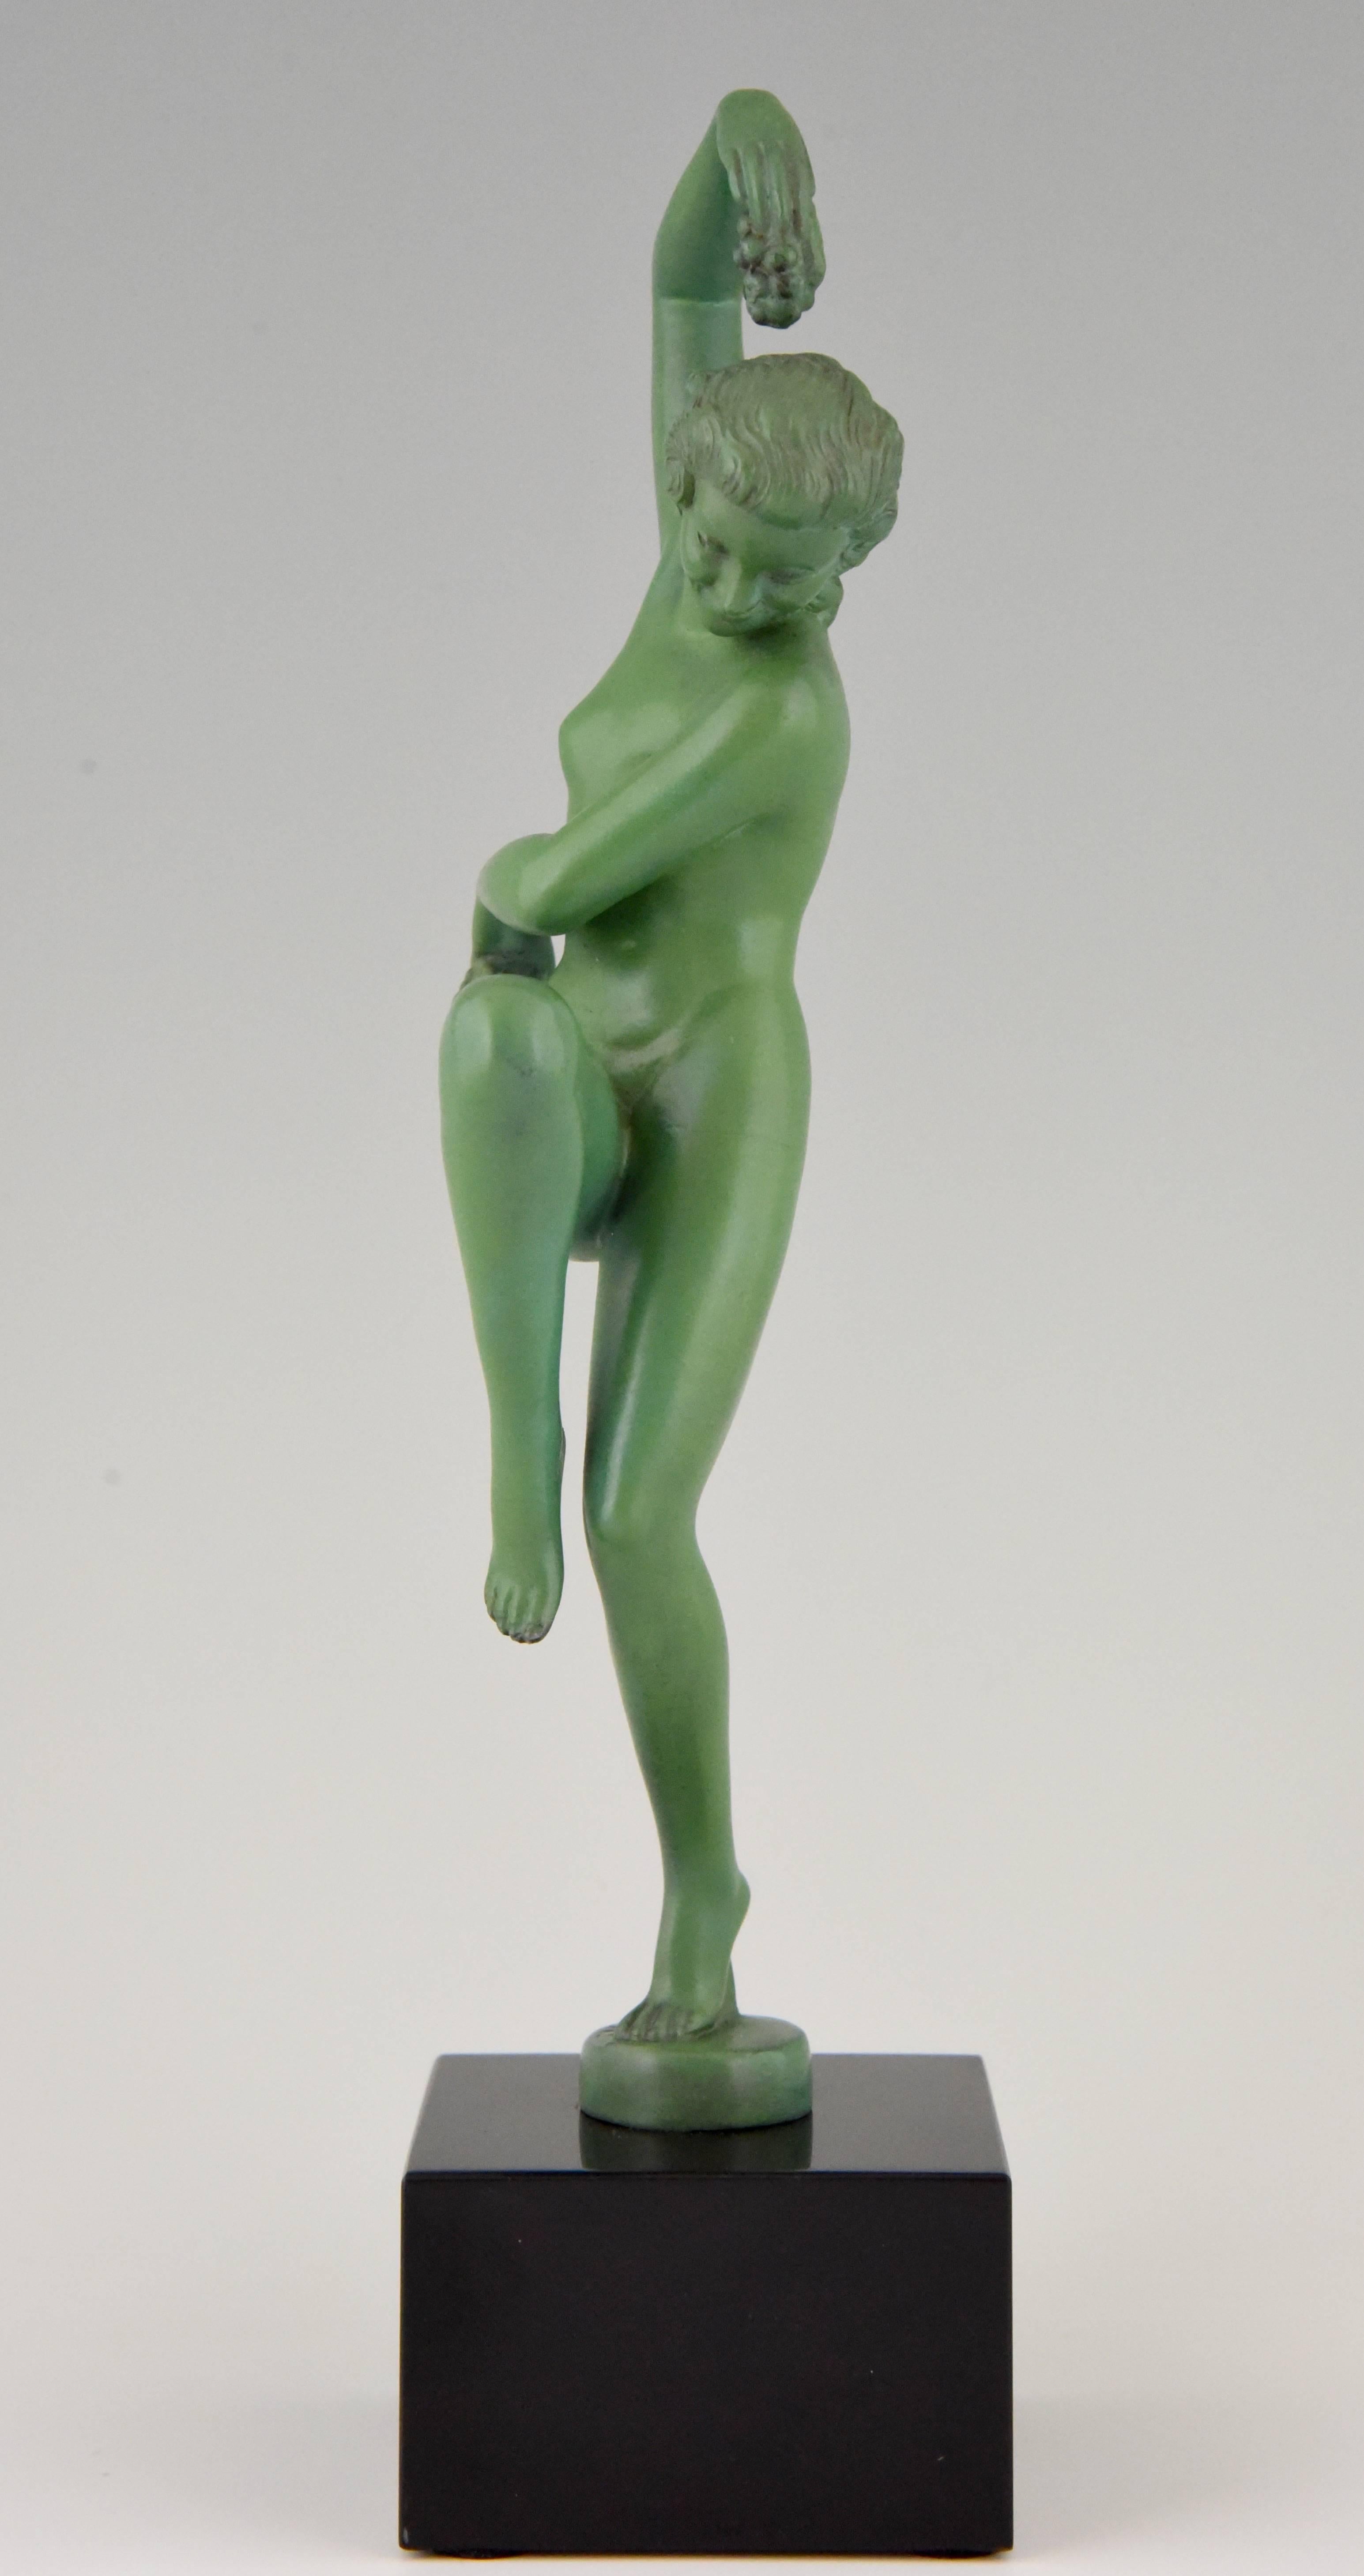 Patinated Art Deco Sculpture of a Nude Dancer with Grapes Denis, France, 1930